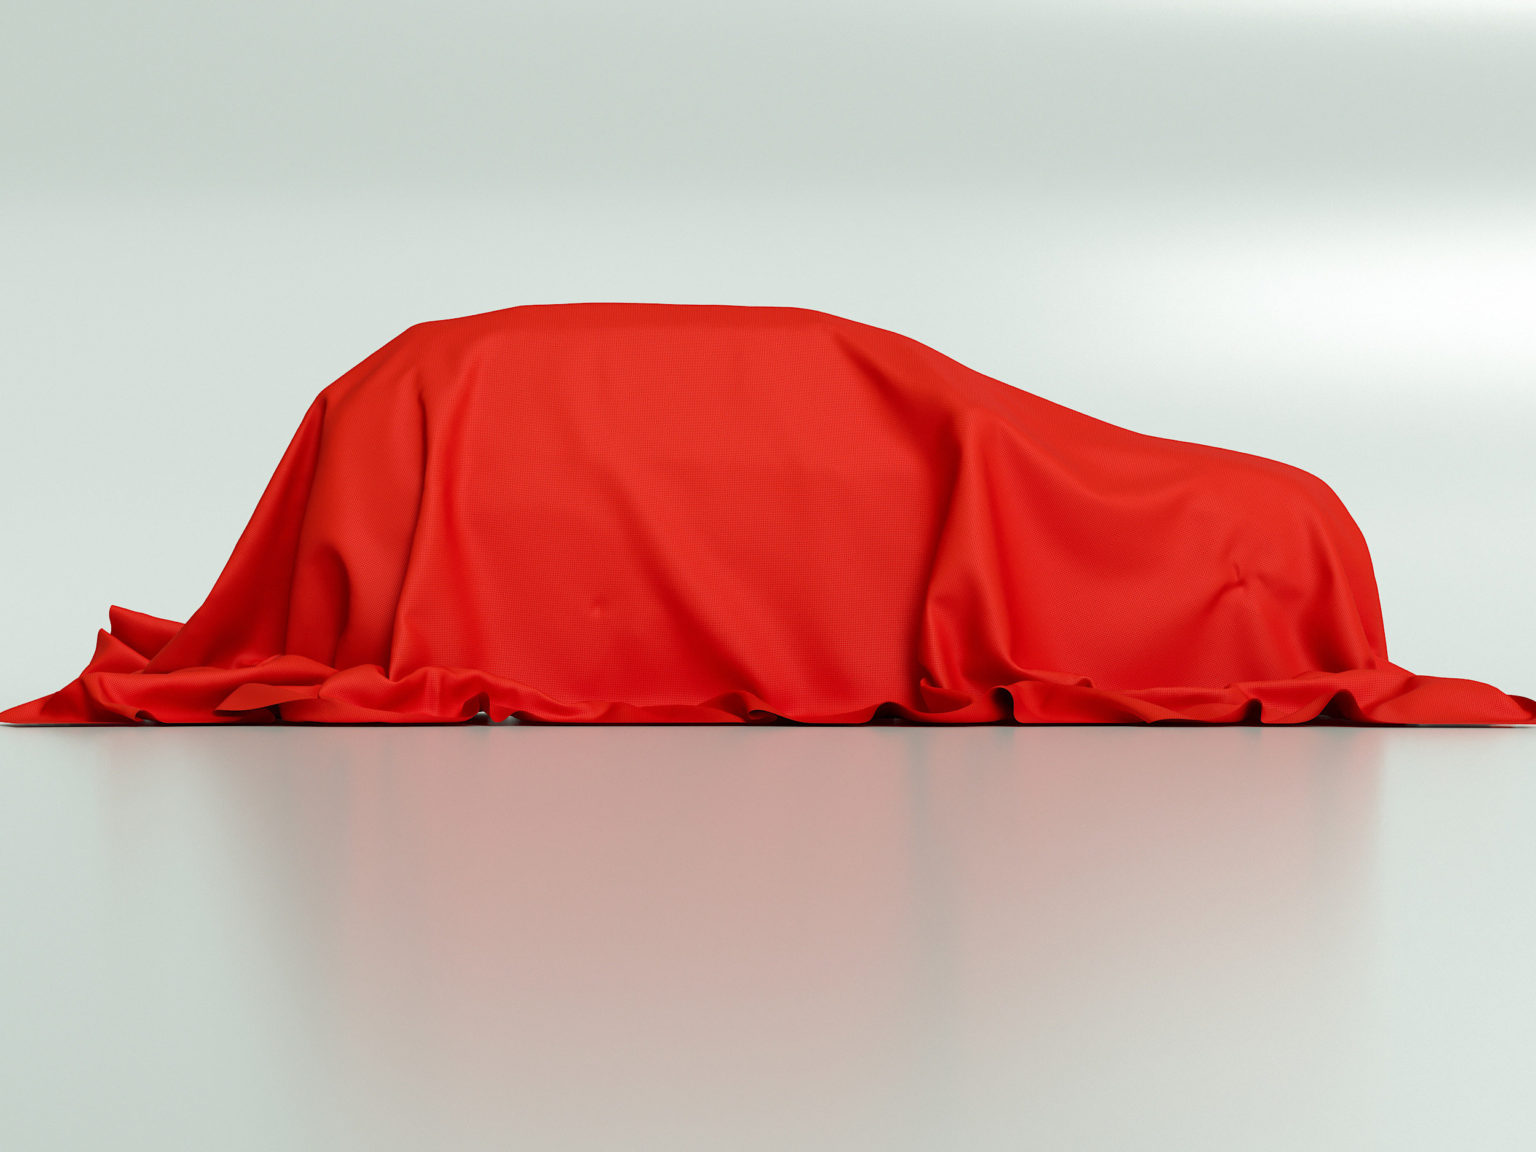 Mitsubishi is committing to five new vehicle reveals in the next year.